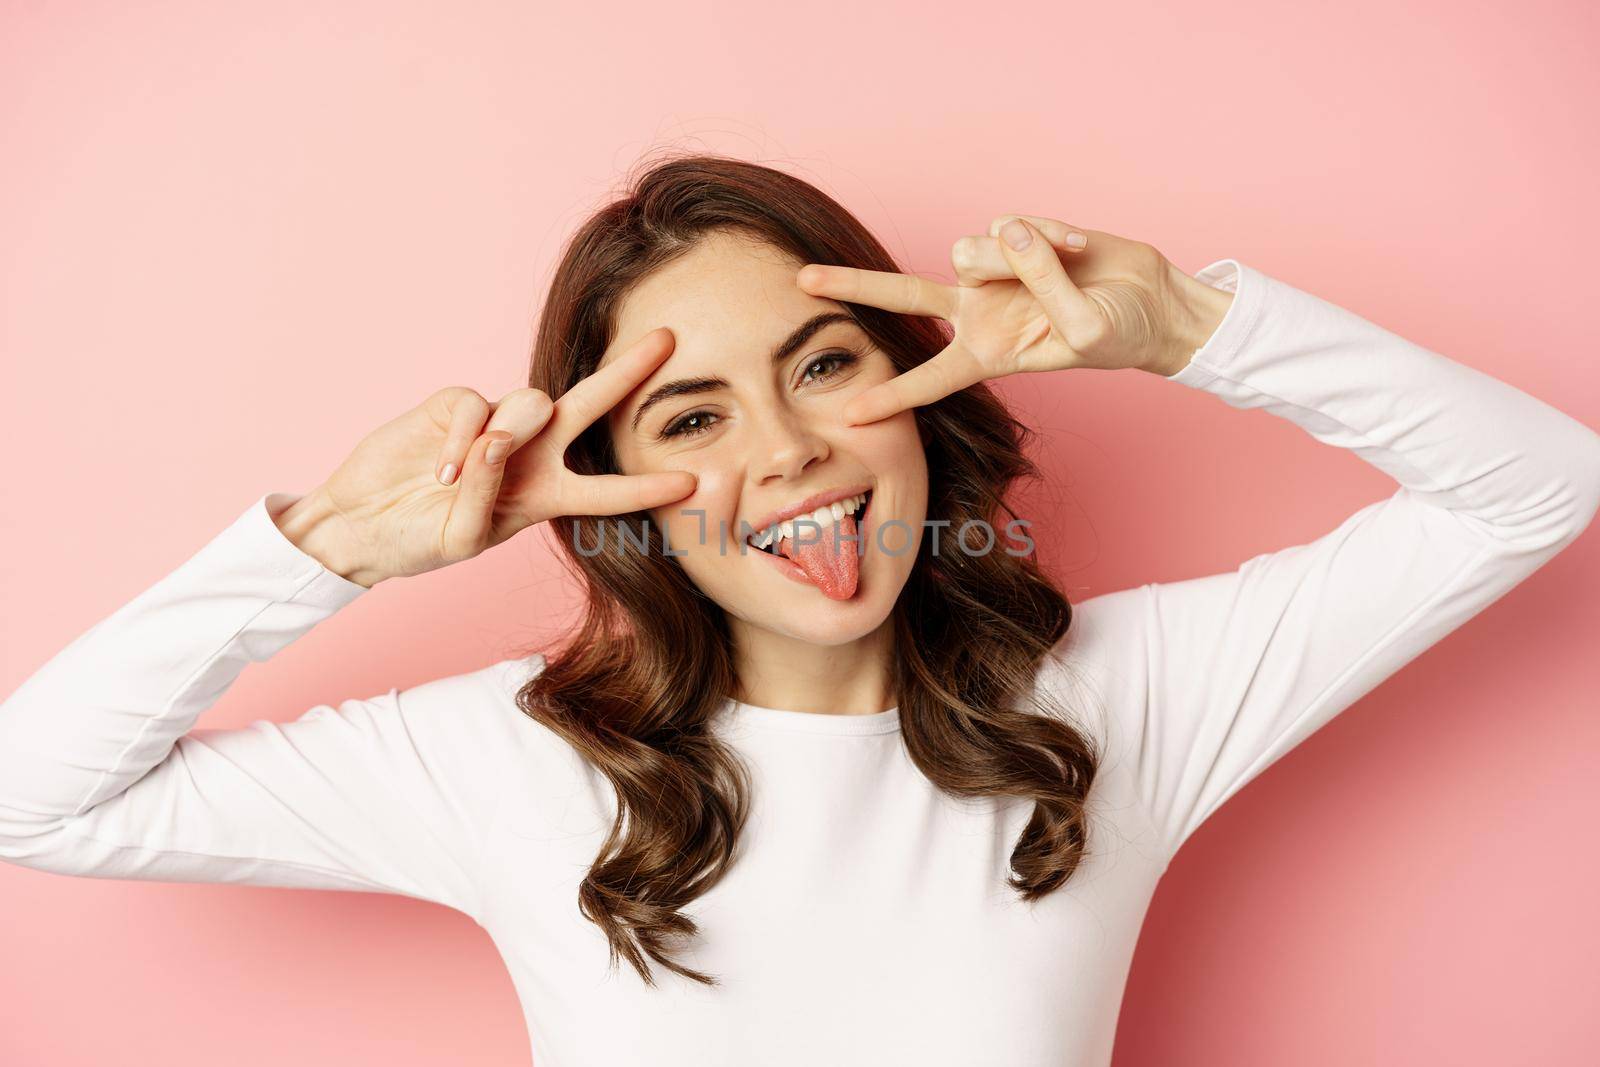 Close up face of young stylish girl, sassy woman showing happy, excited face expression, peace v-sign over eyes, standing against pink background.